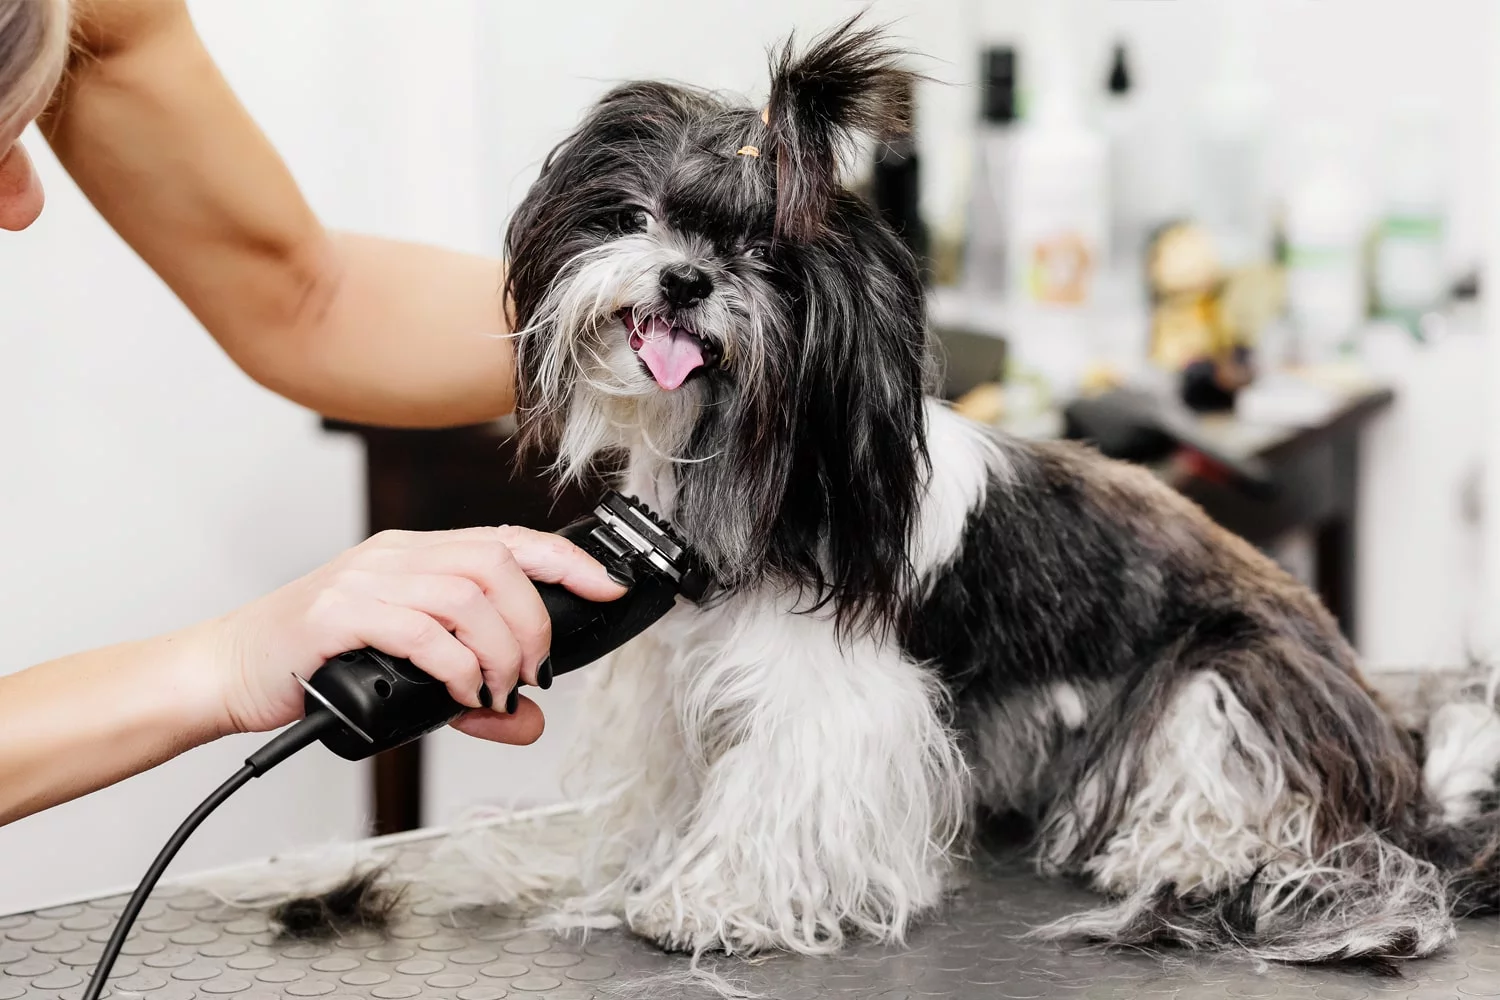 Grooming Essentials: Reviewing the Best Brushes, Shampoos, and Tools for Pet Care